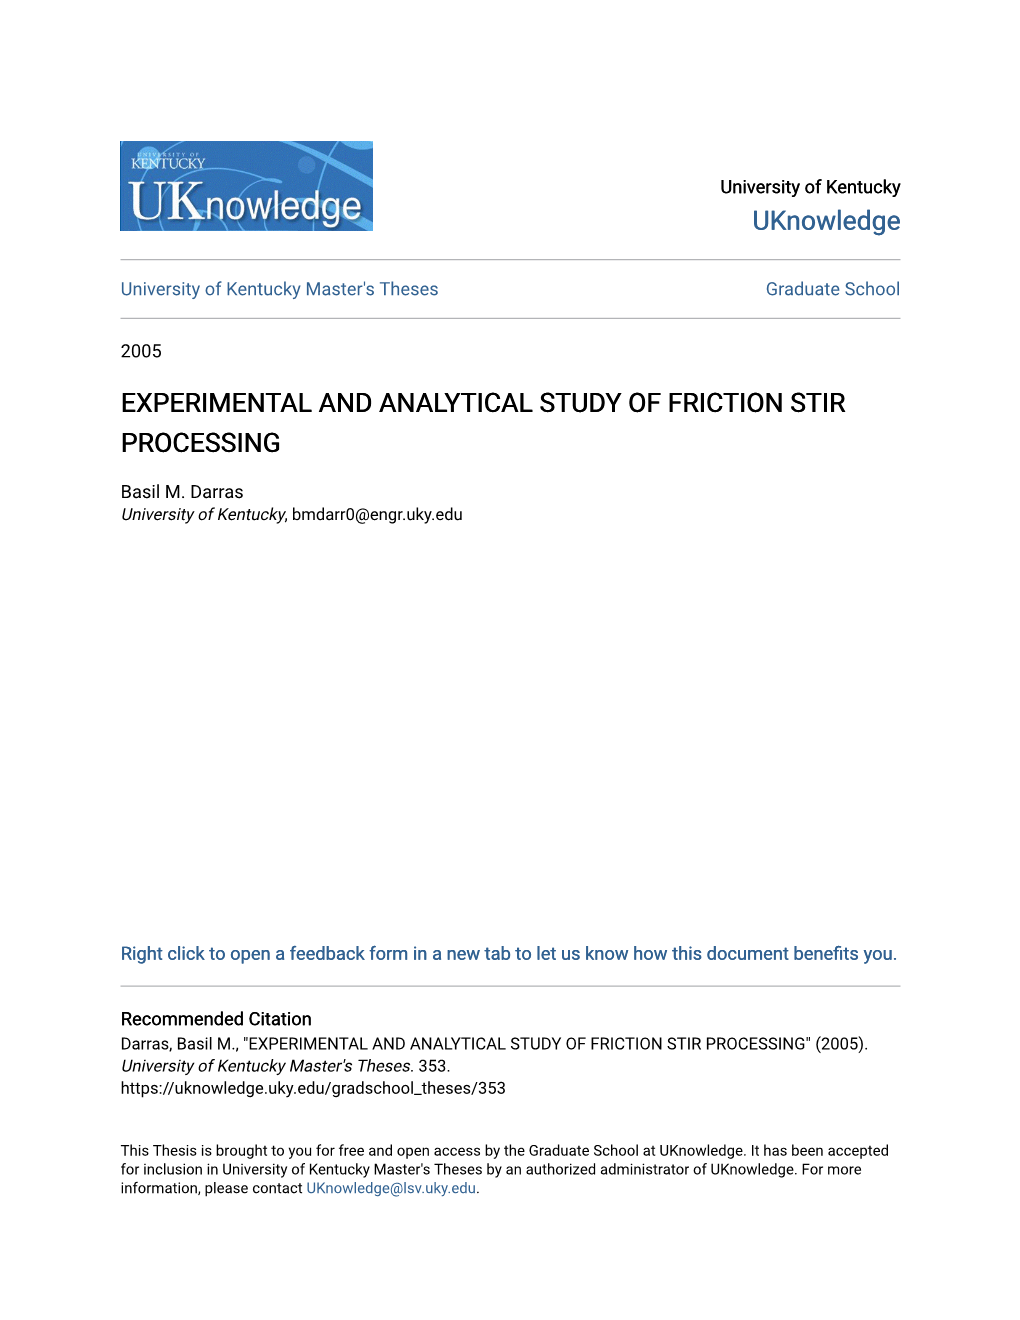 Experimental and Analytical Study of Friction Stir Processing